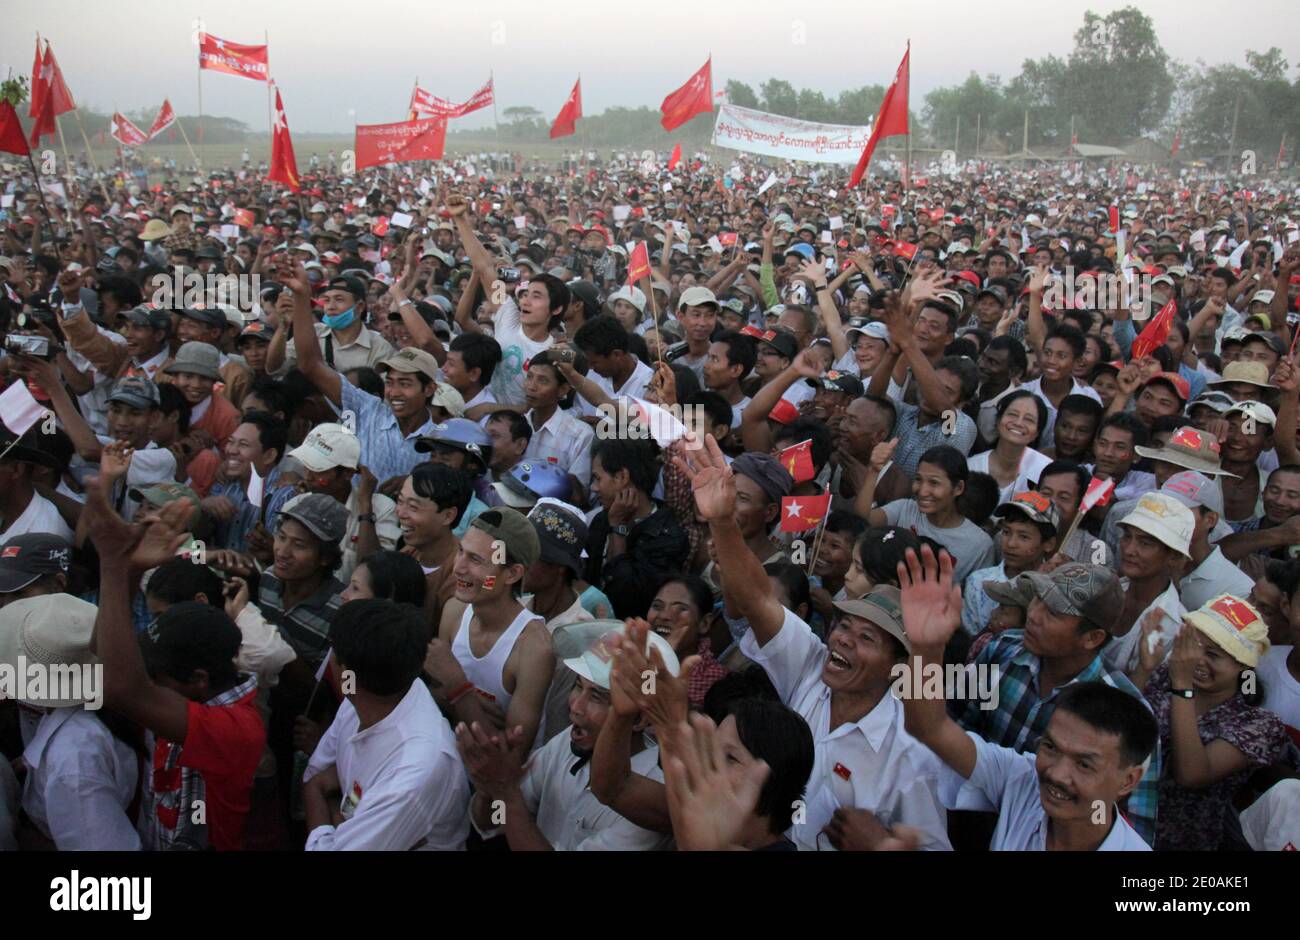 The crowd cheers Nobel Peace Prize winner and National League for Democracy [NLD] chairman Aung San Suu Kyi on campaign in Thongwa Township, 50 miles north of Yangon, the economical capital of Myanmar, Rangoon Region, Myanmar, on February 26, 2012. Her friend Su Su Lwin is running in this township. More than 30,000 people from nearby areas gathered along the road and fields to hear her speak. Su Su Lwin, one of the closest friend of Aung San Suu Kyi, is running for the lections in this township. Photo by Christophe Loviny/ABACAPRESS.COM Stock Photo